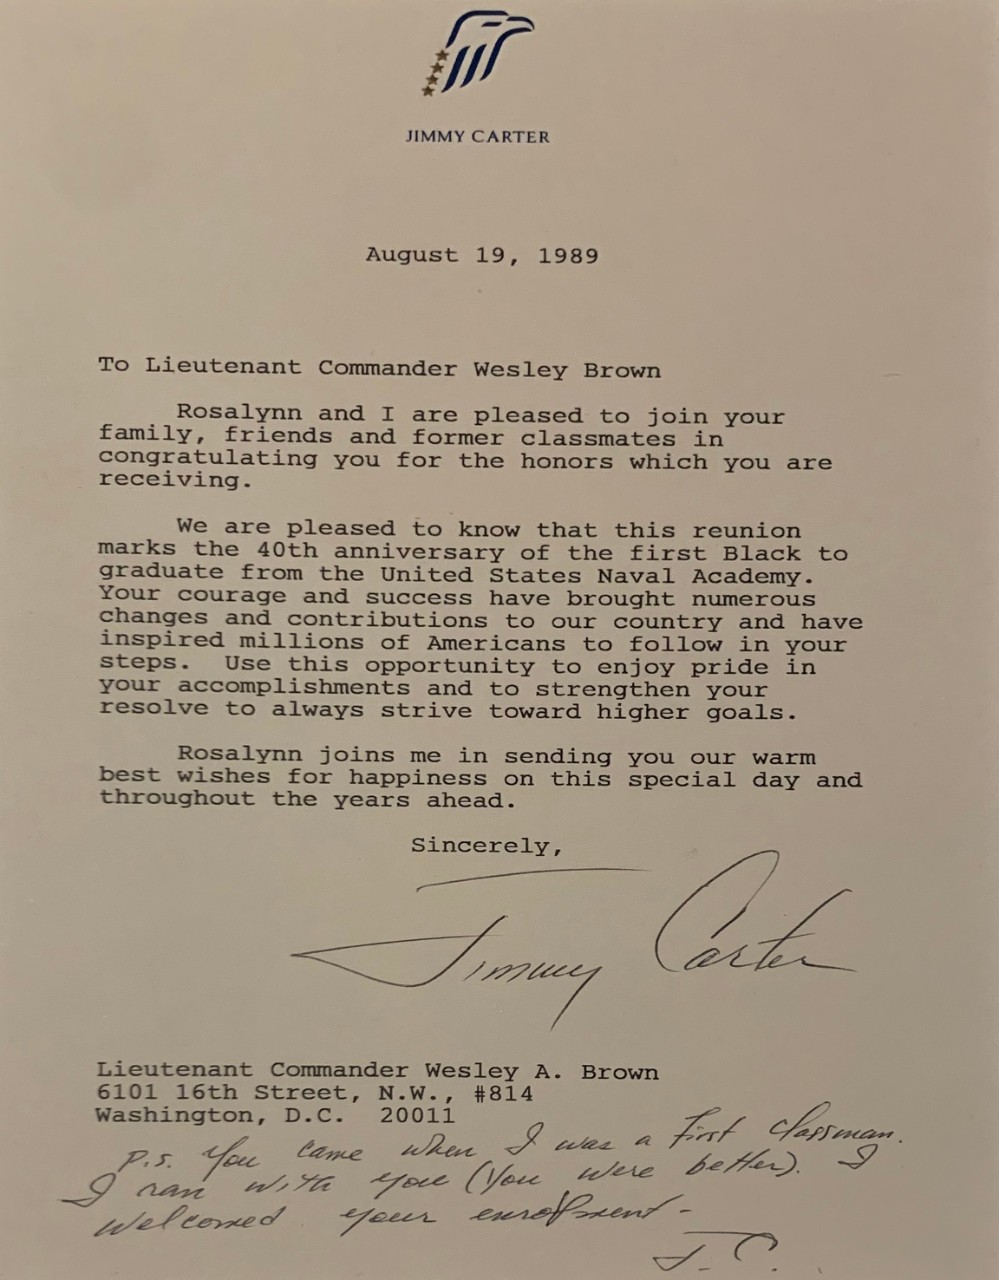 Letter from former president Jimmy Carter to LCDR Wesley Brown, 19 August 1989